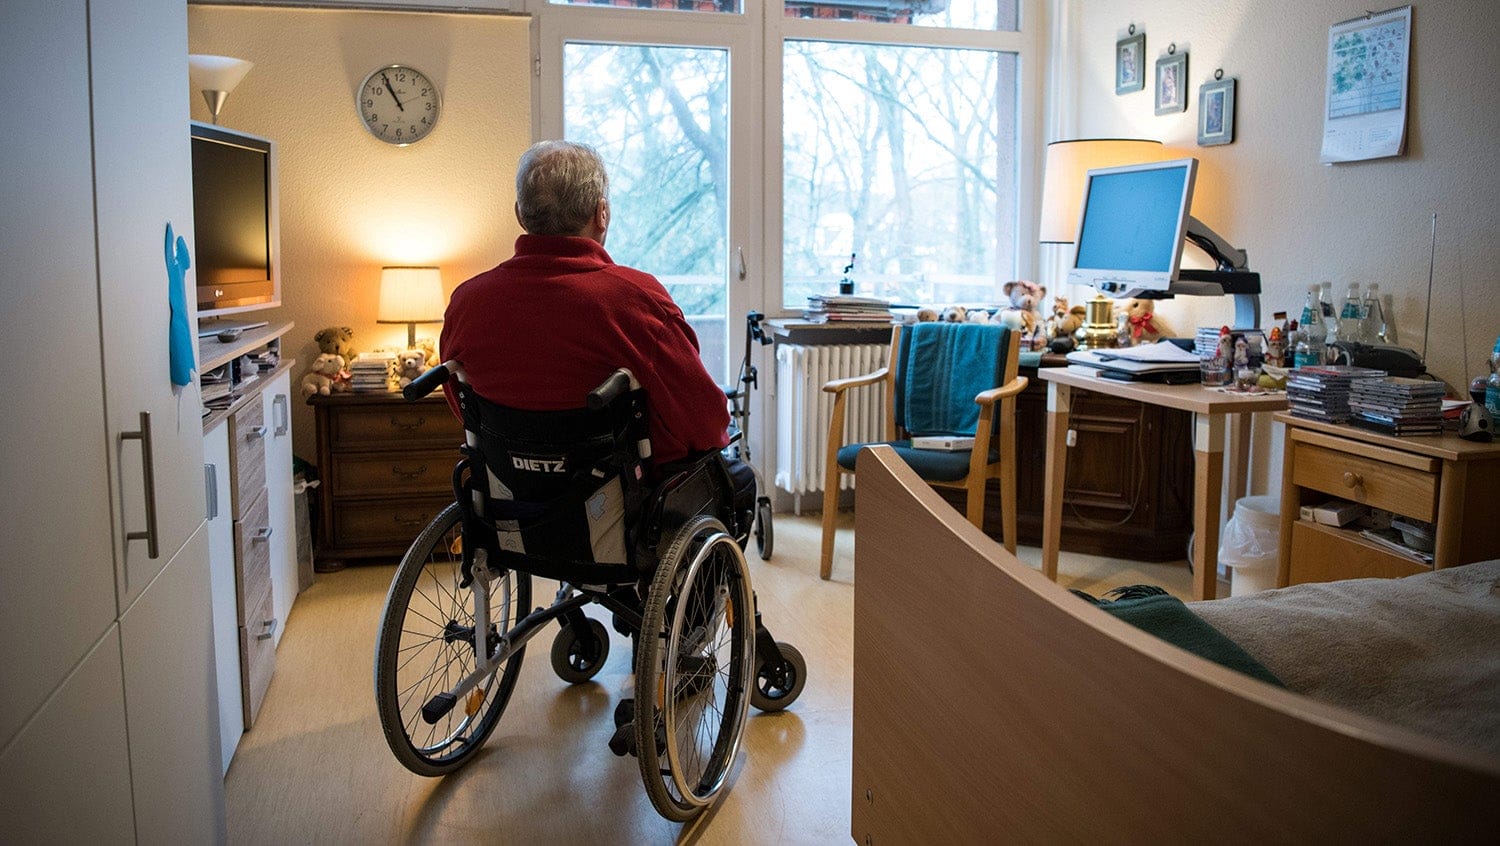 nursing home isolation during covid-19 pandemic